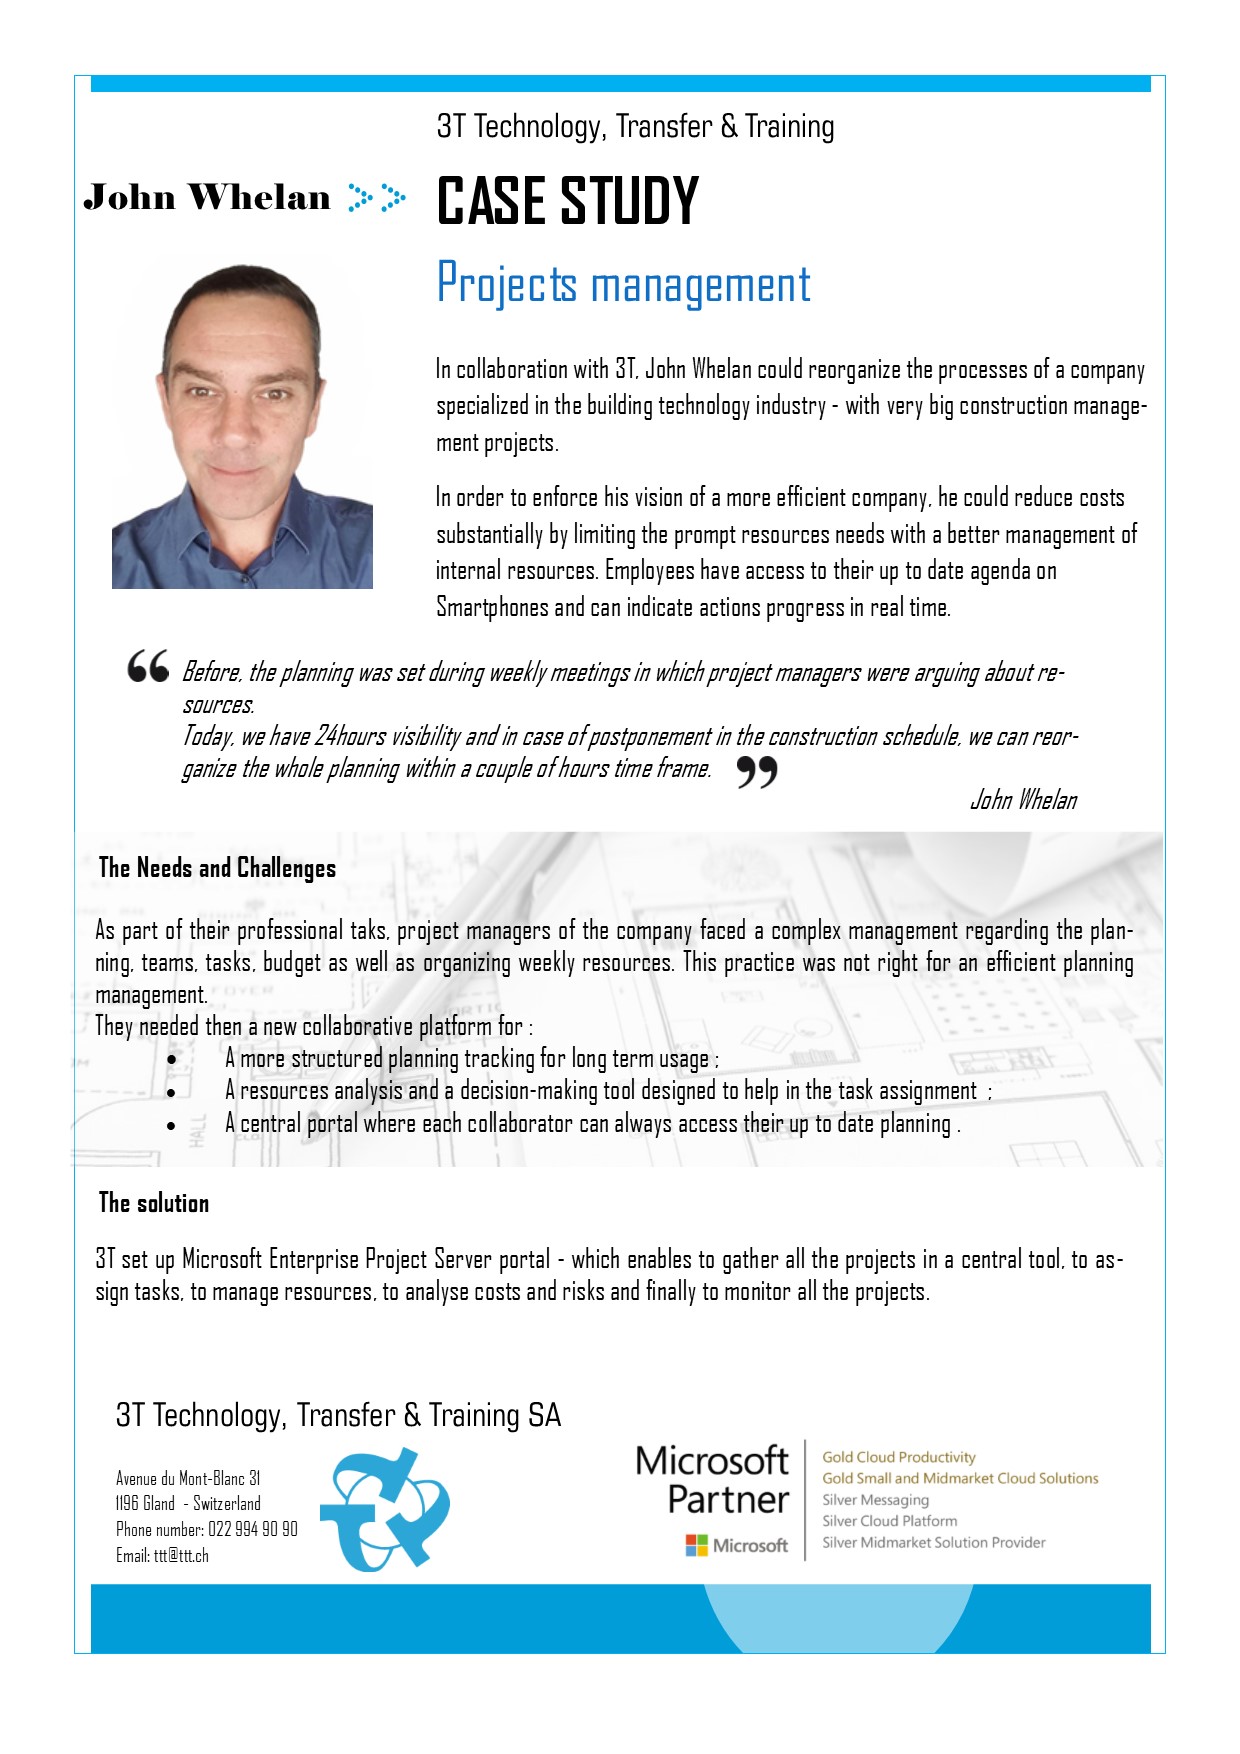 Projects management : success story